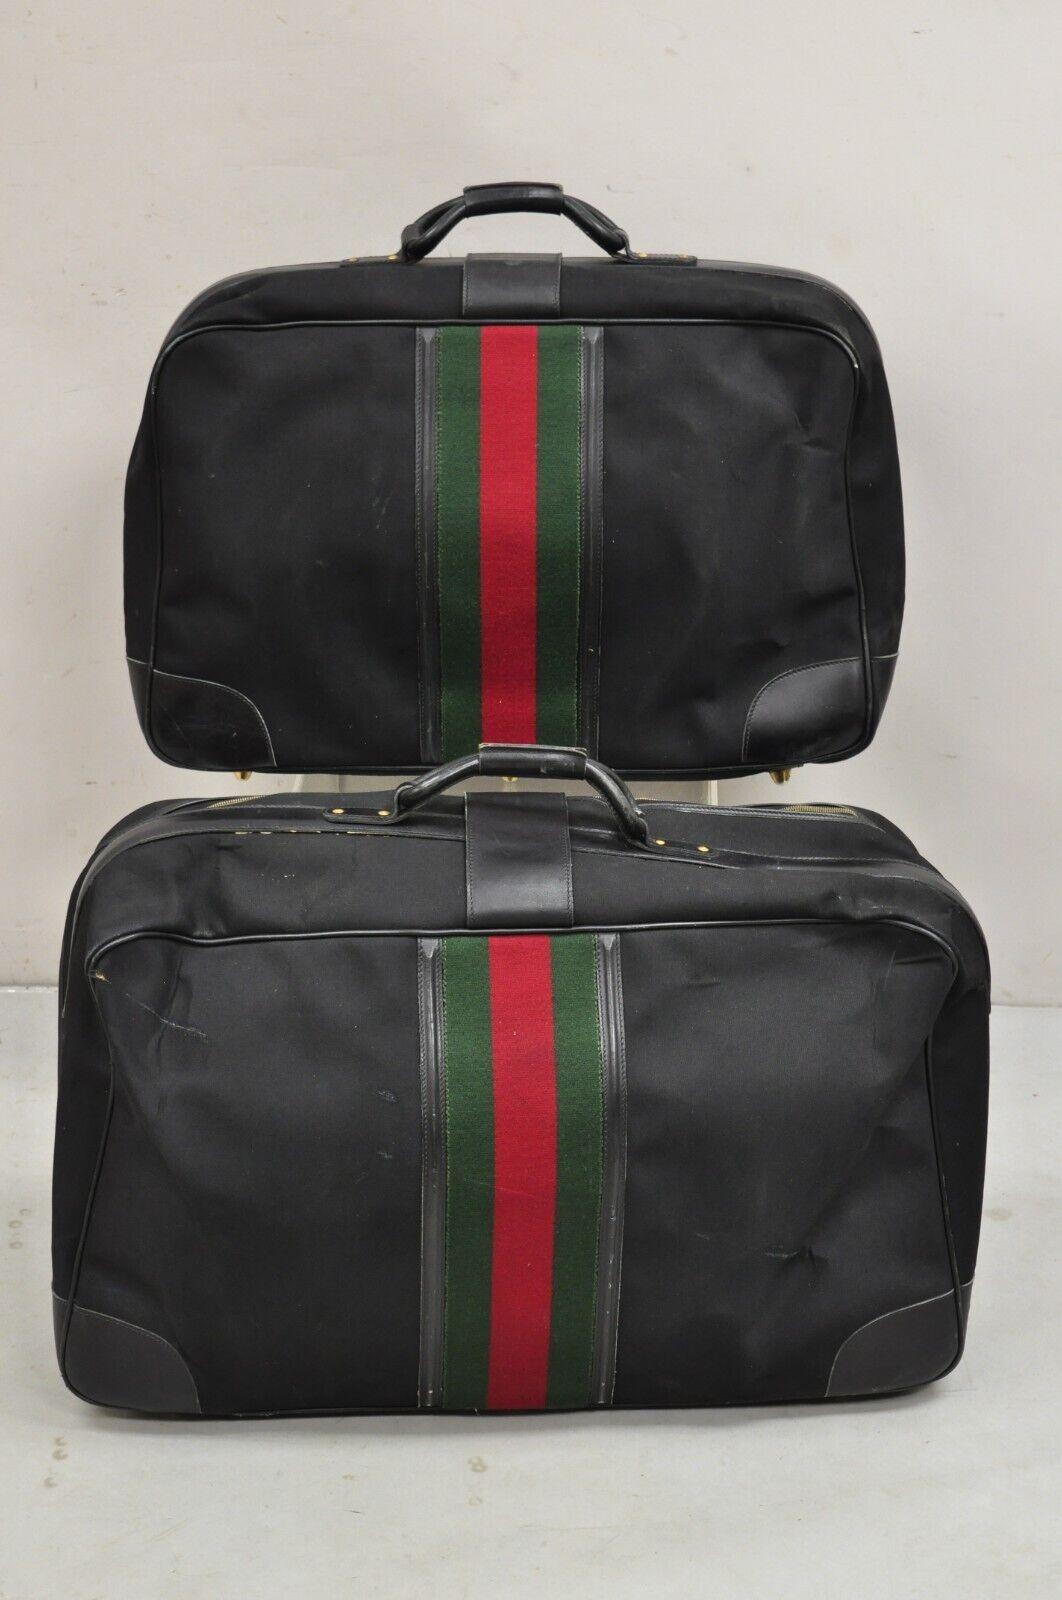 Vintage Gucci Black Canvas & Leather Suitcase Luggage His and Hers Set -2 Pc (B) In Good Condition For Sale In Philadelphia, PA